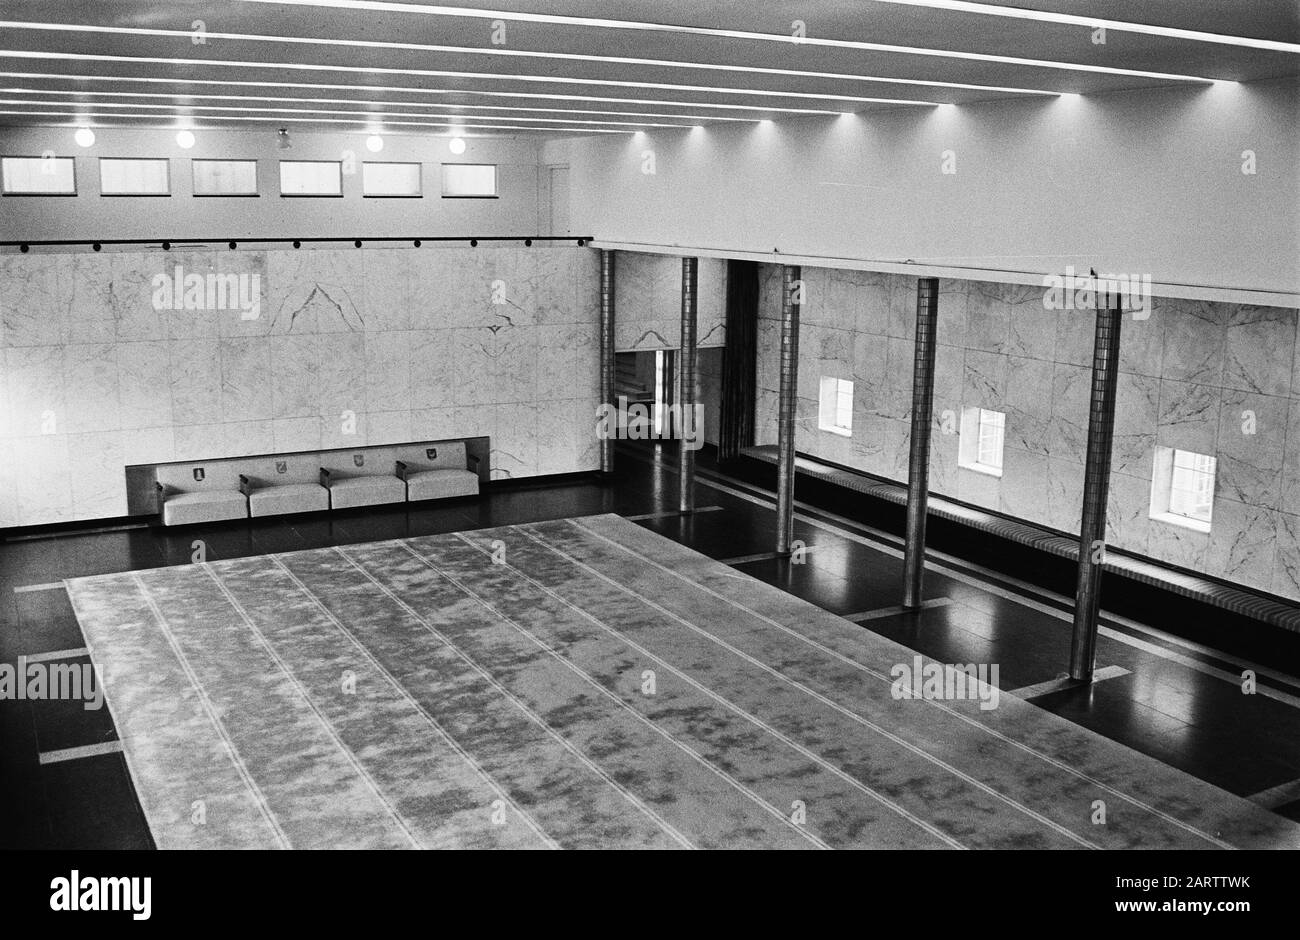 City Hall in Hilversum by architect W.M. Dudok, interior Date: December 6, 1974 Location: Hilversum, Noord-Holland Keywords: architecture, buildings, interiors, town halls Stock Photo